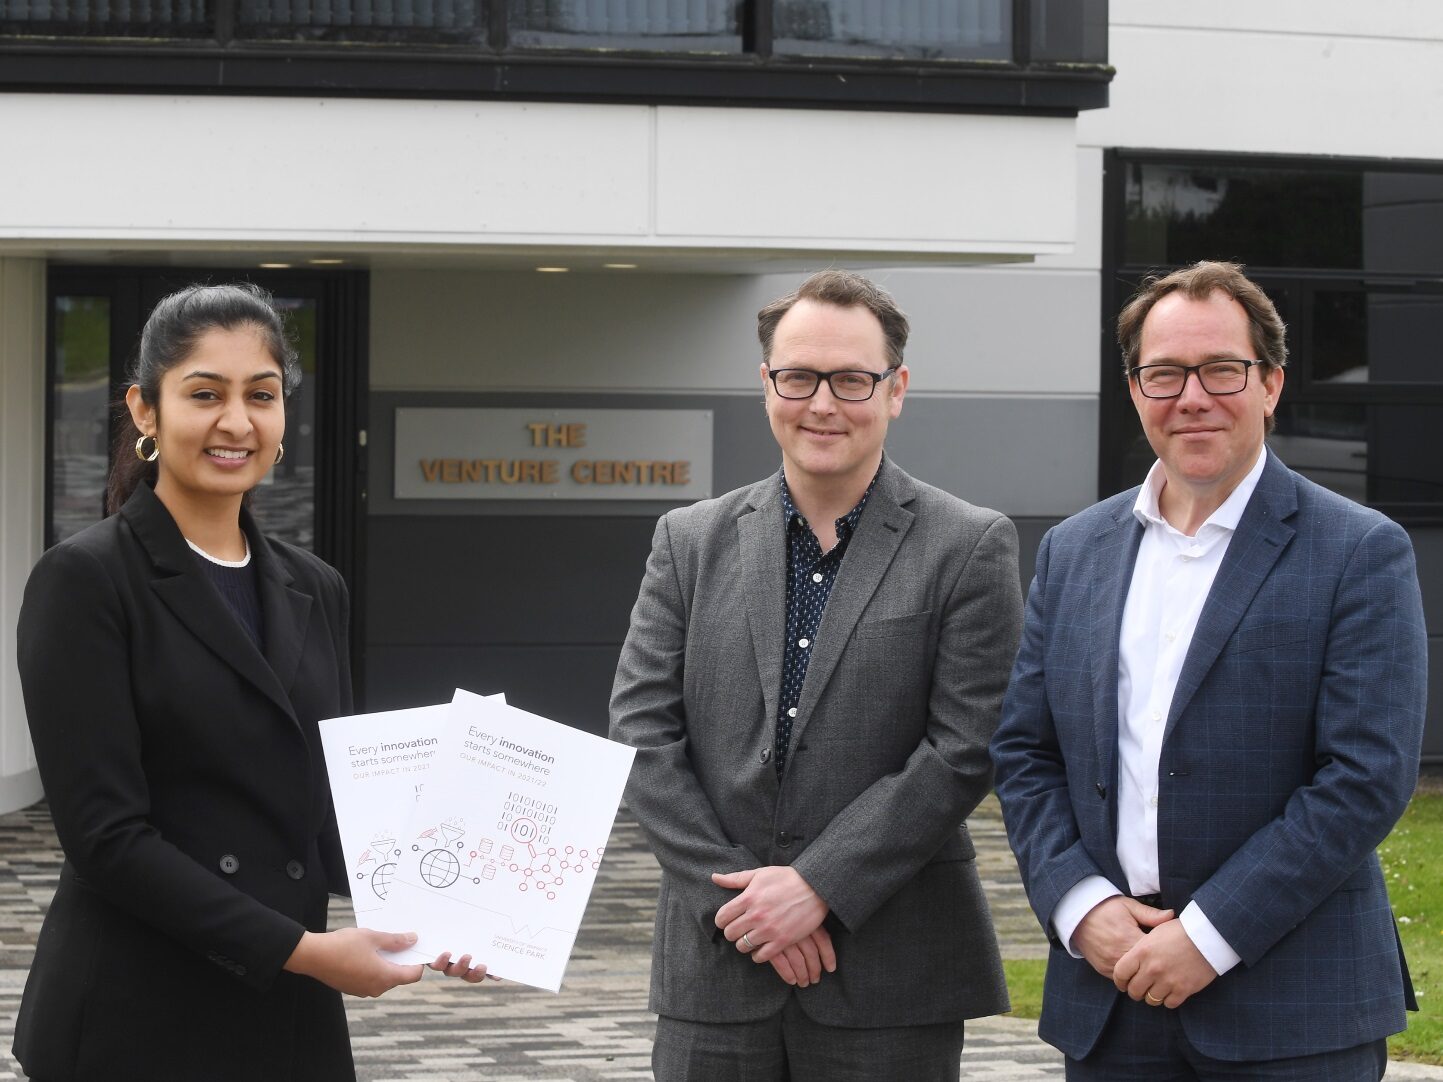 Zarah Sultana MP with Mark Tock and Dirk Schaefer